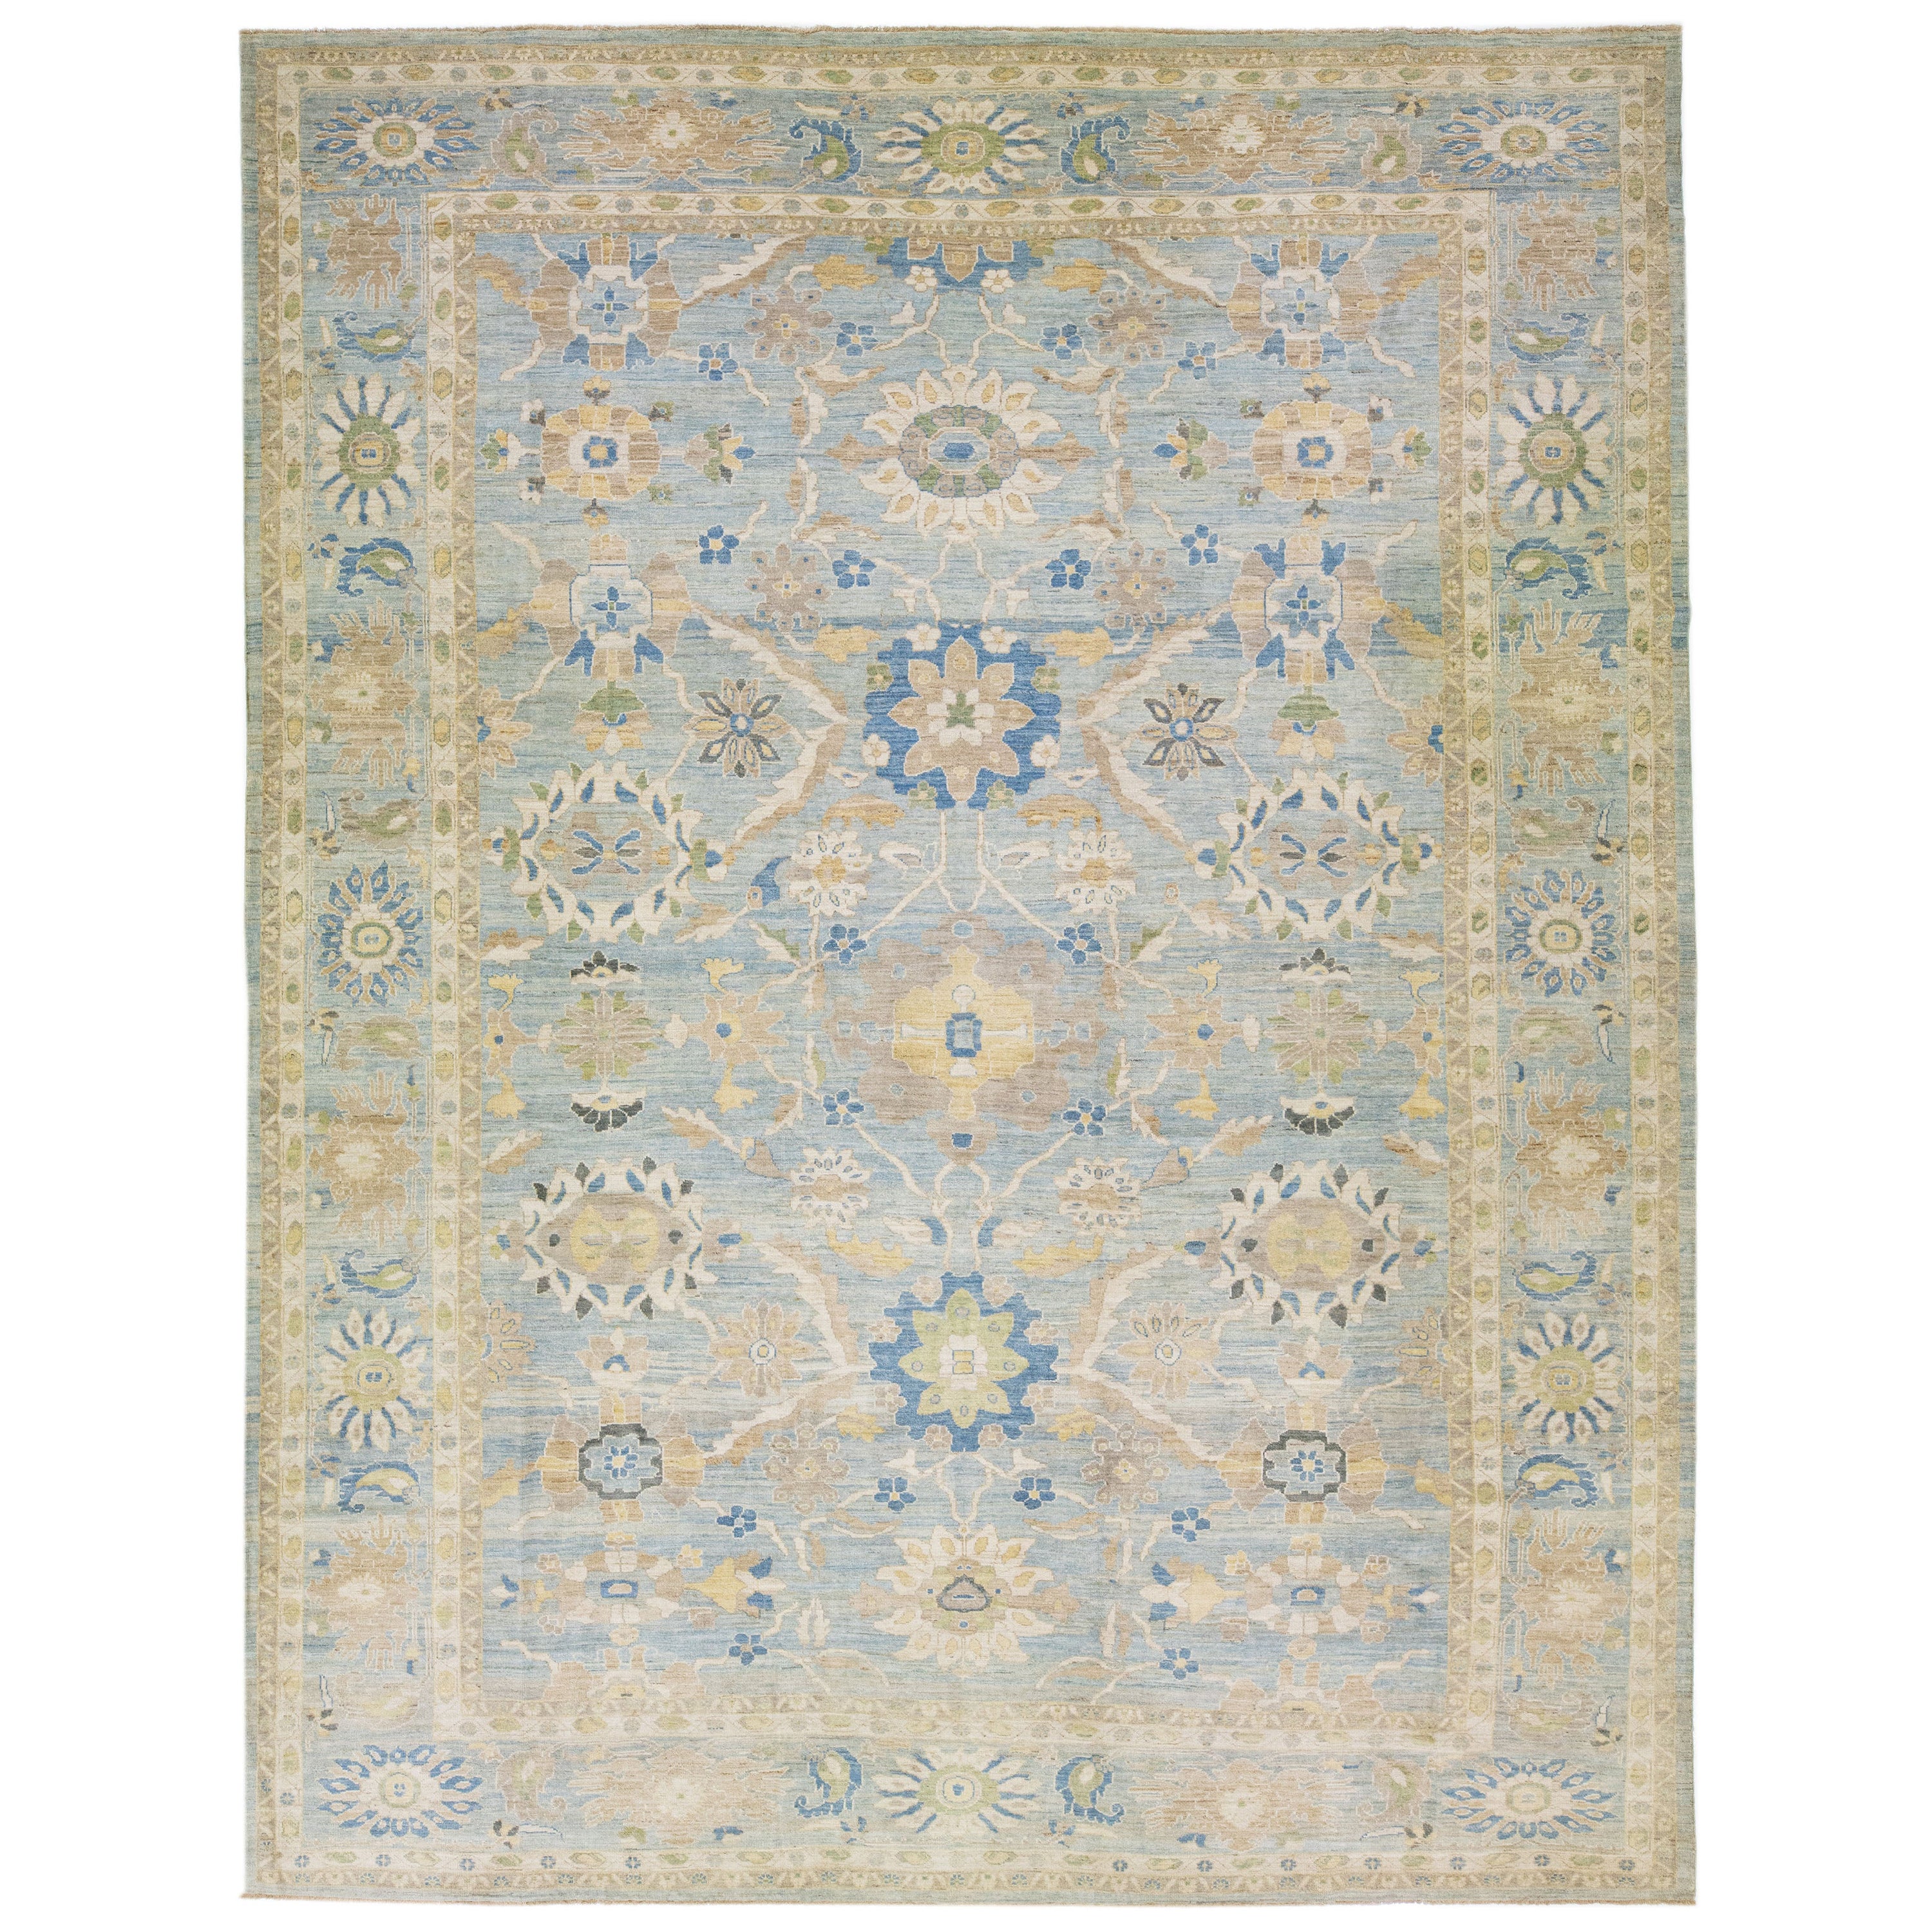 Light Blue Handmade Modern Sultanabad Oversize Wool Rug with Floral Motif